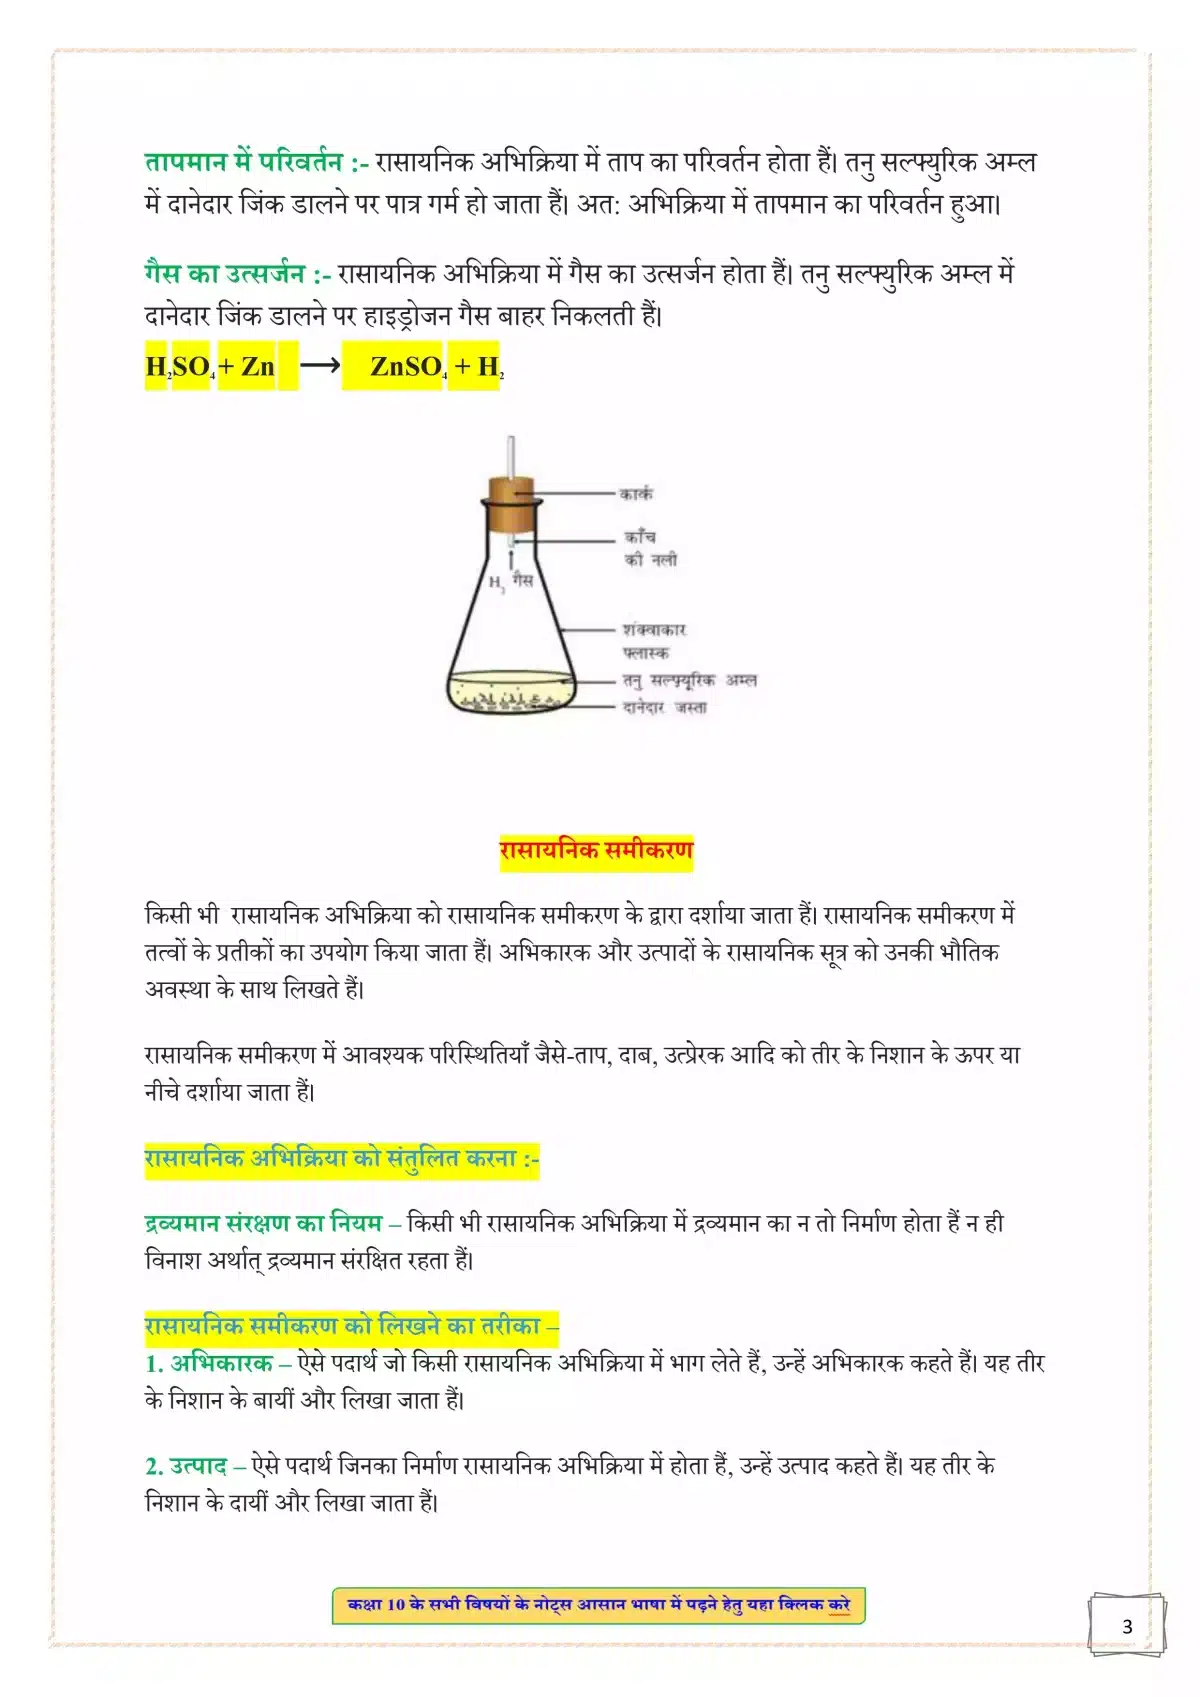 Class 10 science notes pdf in hindi chapter 1 - chemical reactions and equations